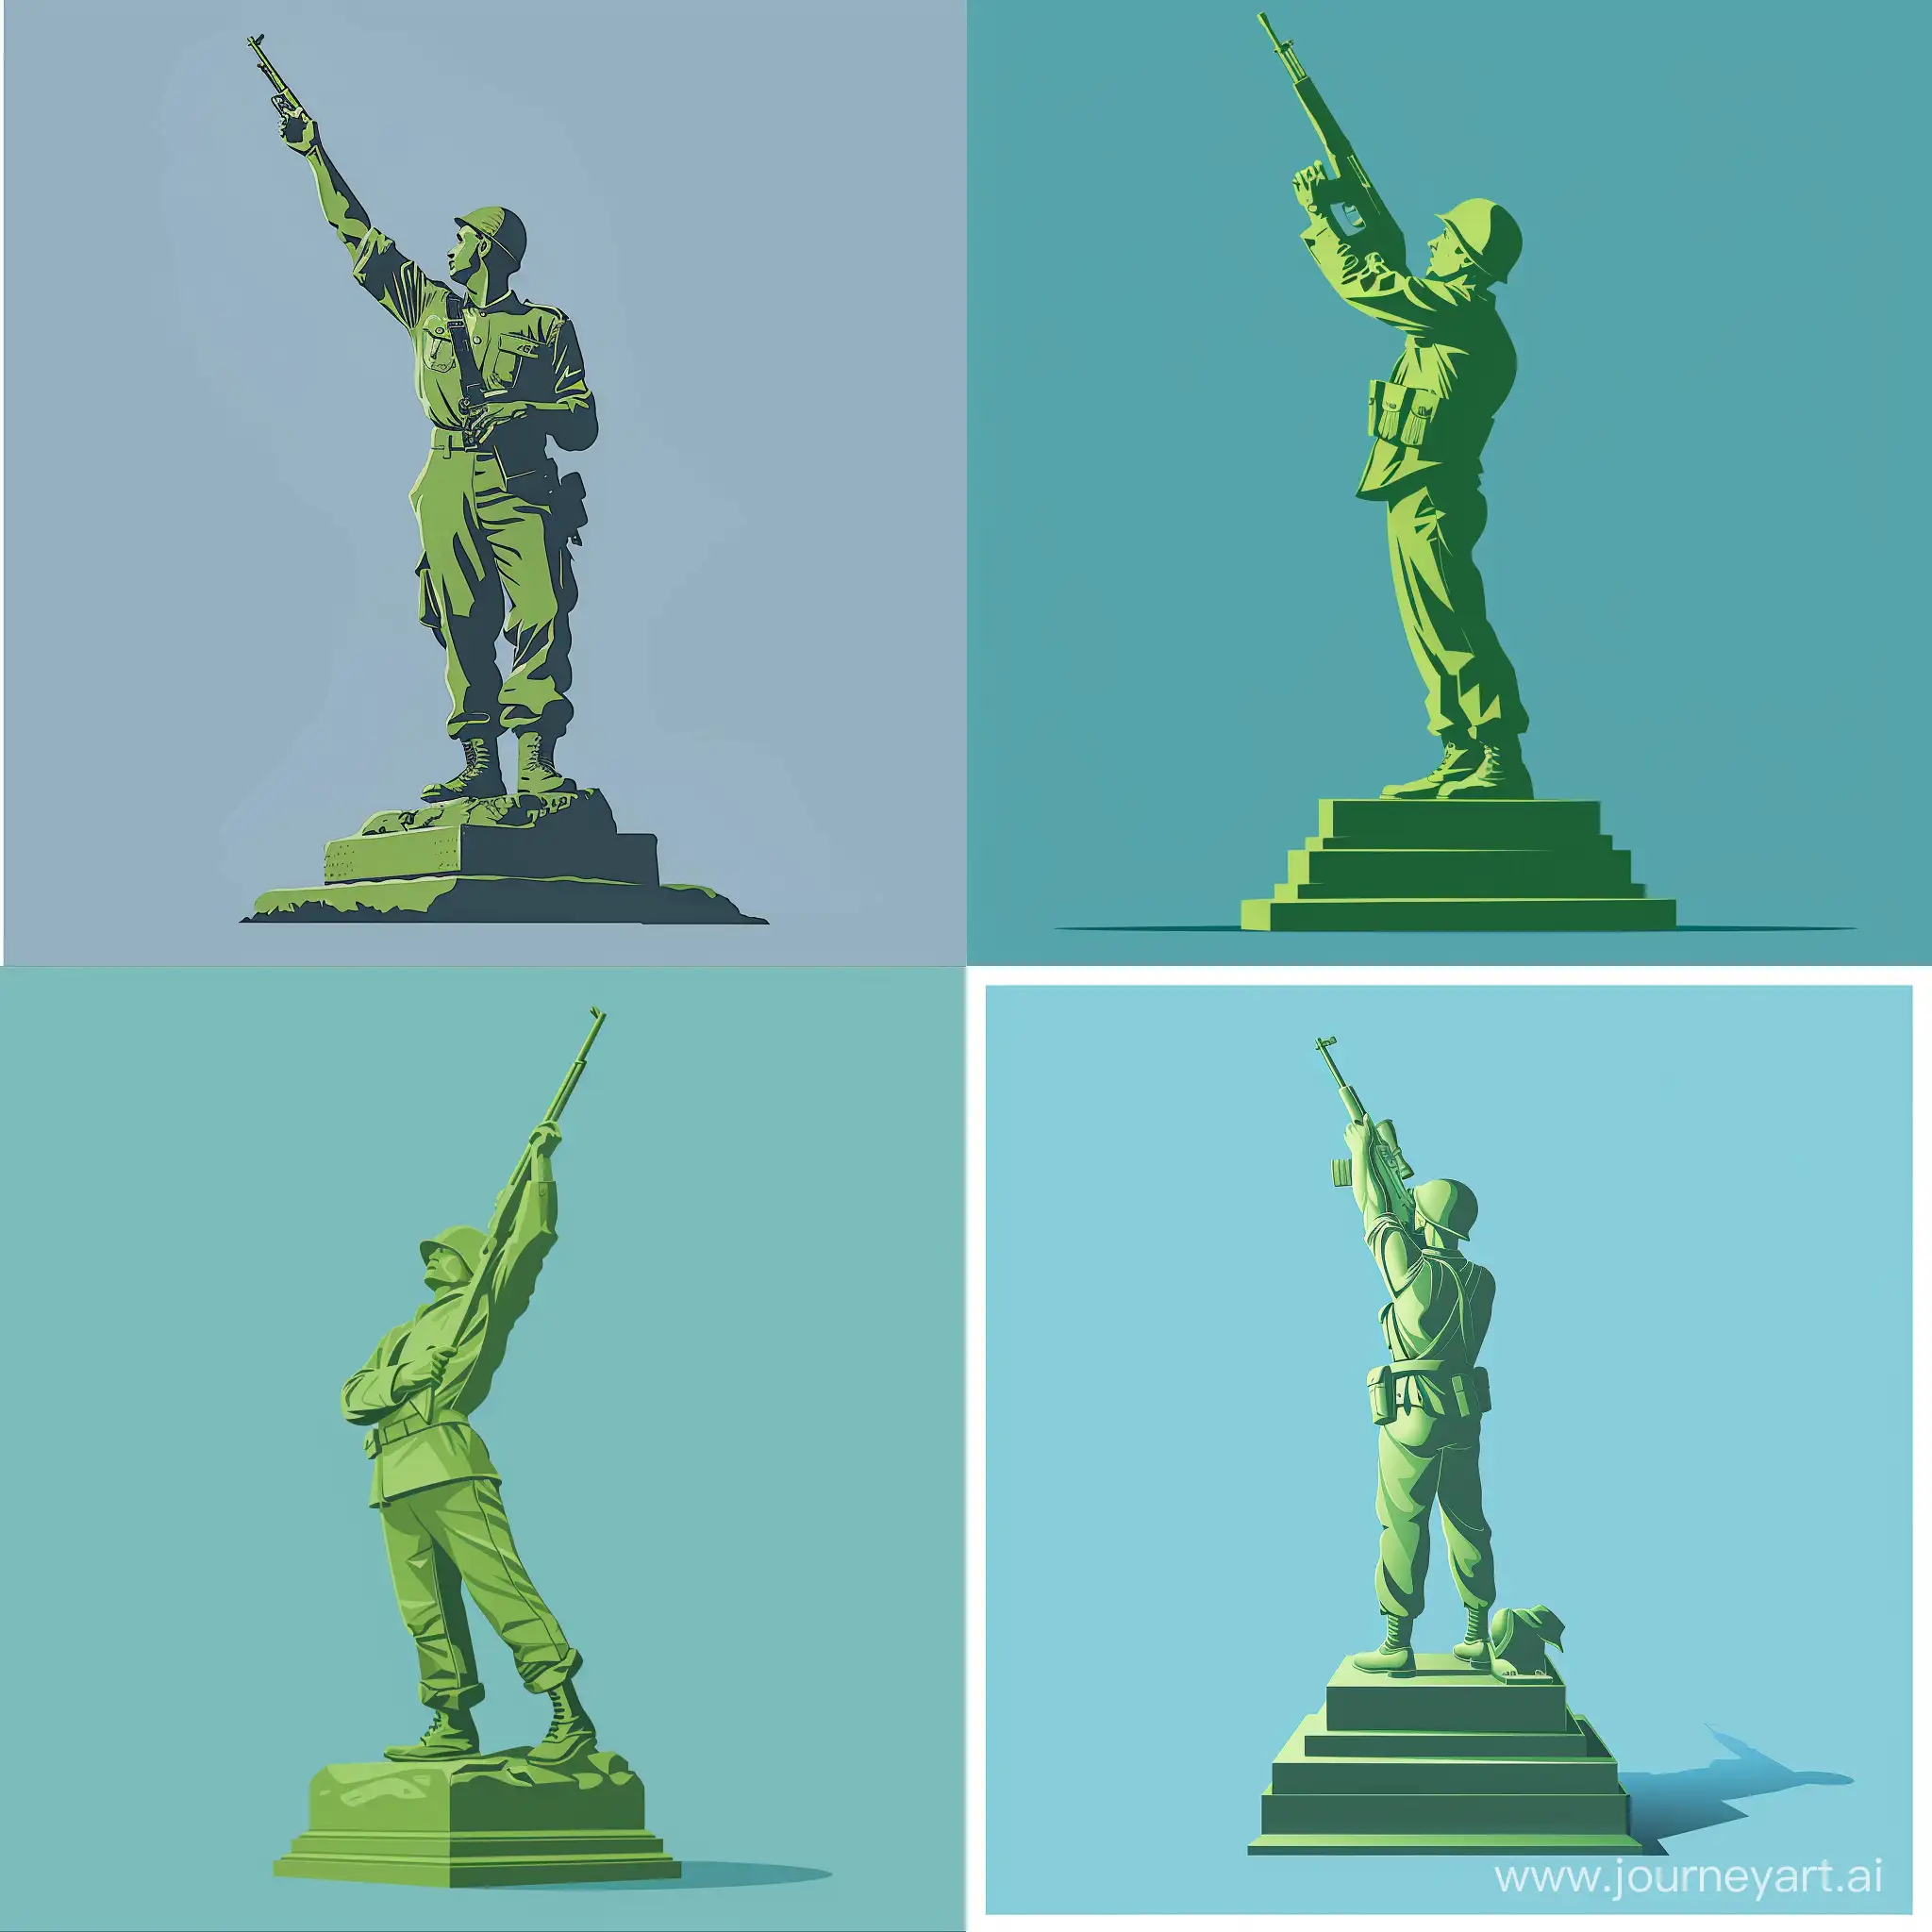 Vector illustrator art image of a green statue of an Algerian soldier standing in 1954, raising his rifle to shoot, with a blue background